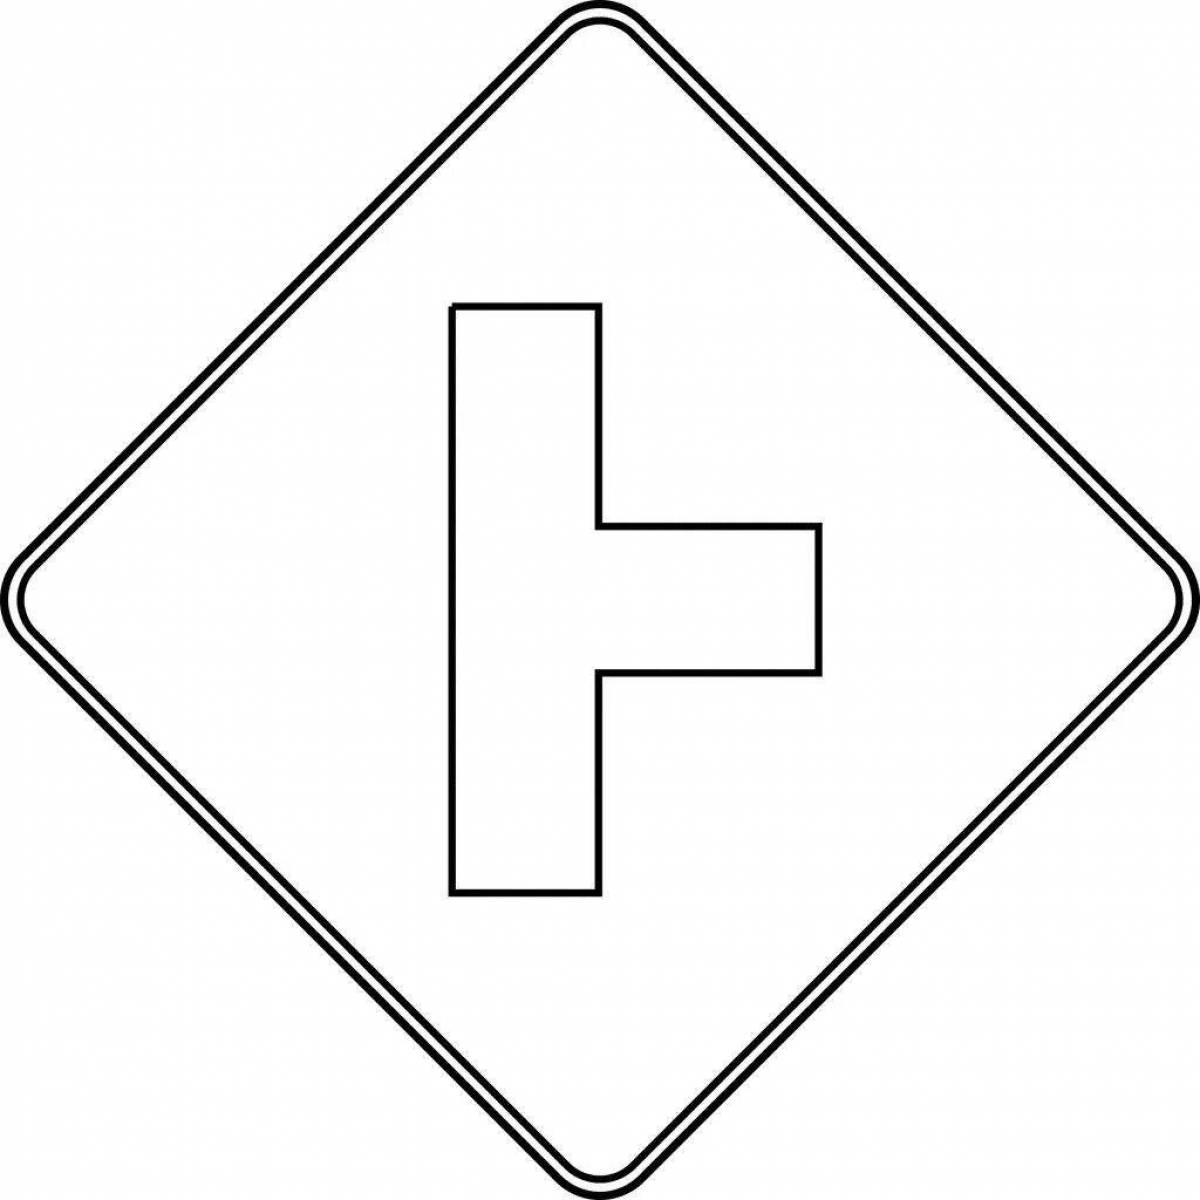 Coloring page bold main road sign